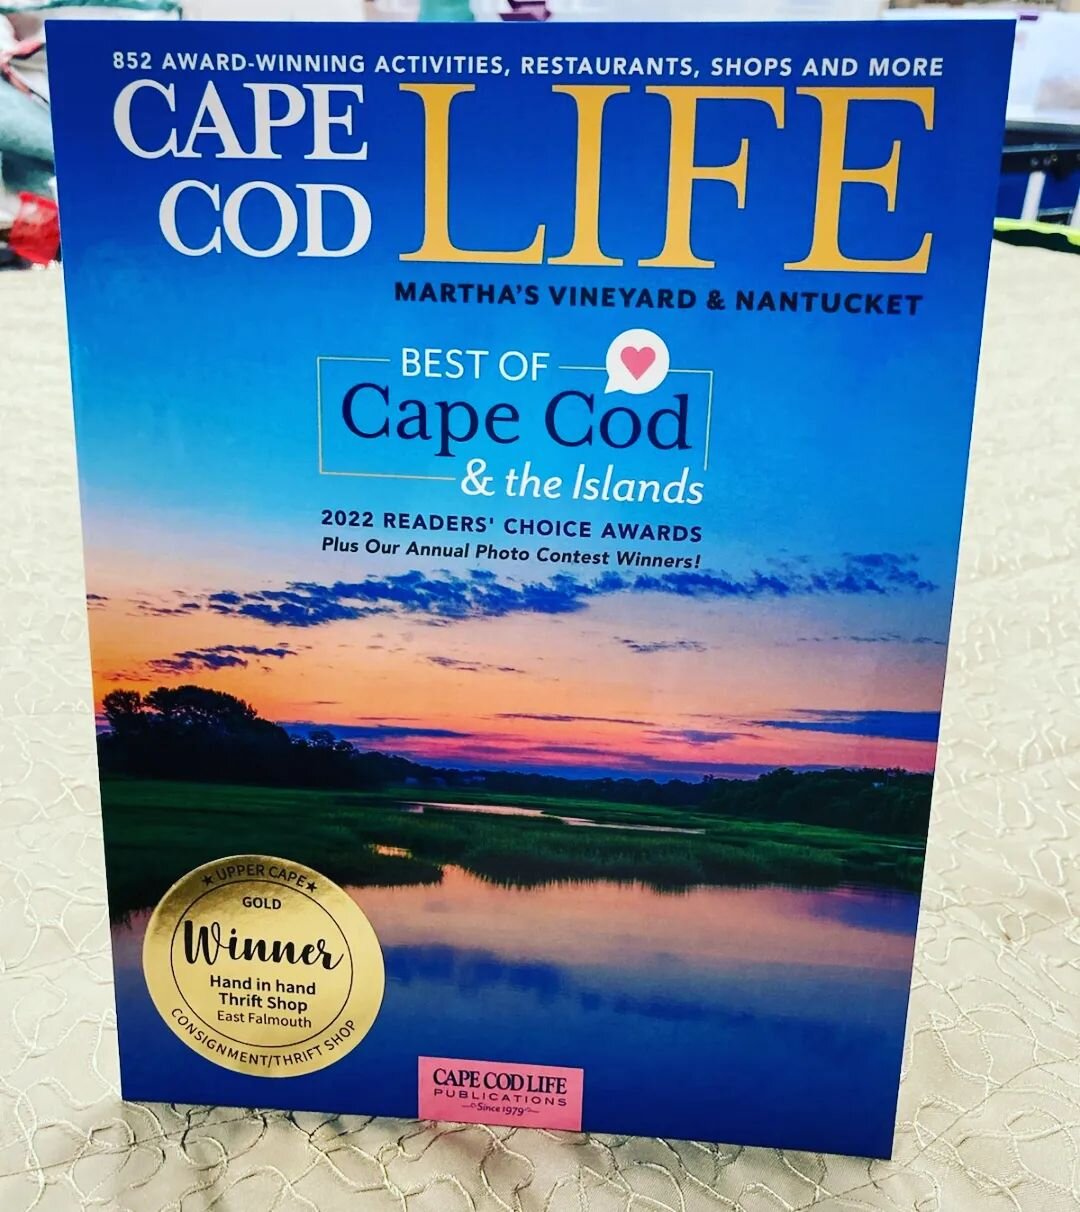 Thank you to all of our customers who voted our Hand in hand Thrift Shop the &quot;Best of Cape Cod and the Islands&quot;! We are so proud of our staff and volunteers who make it such a special place to shop!